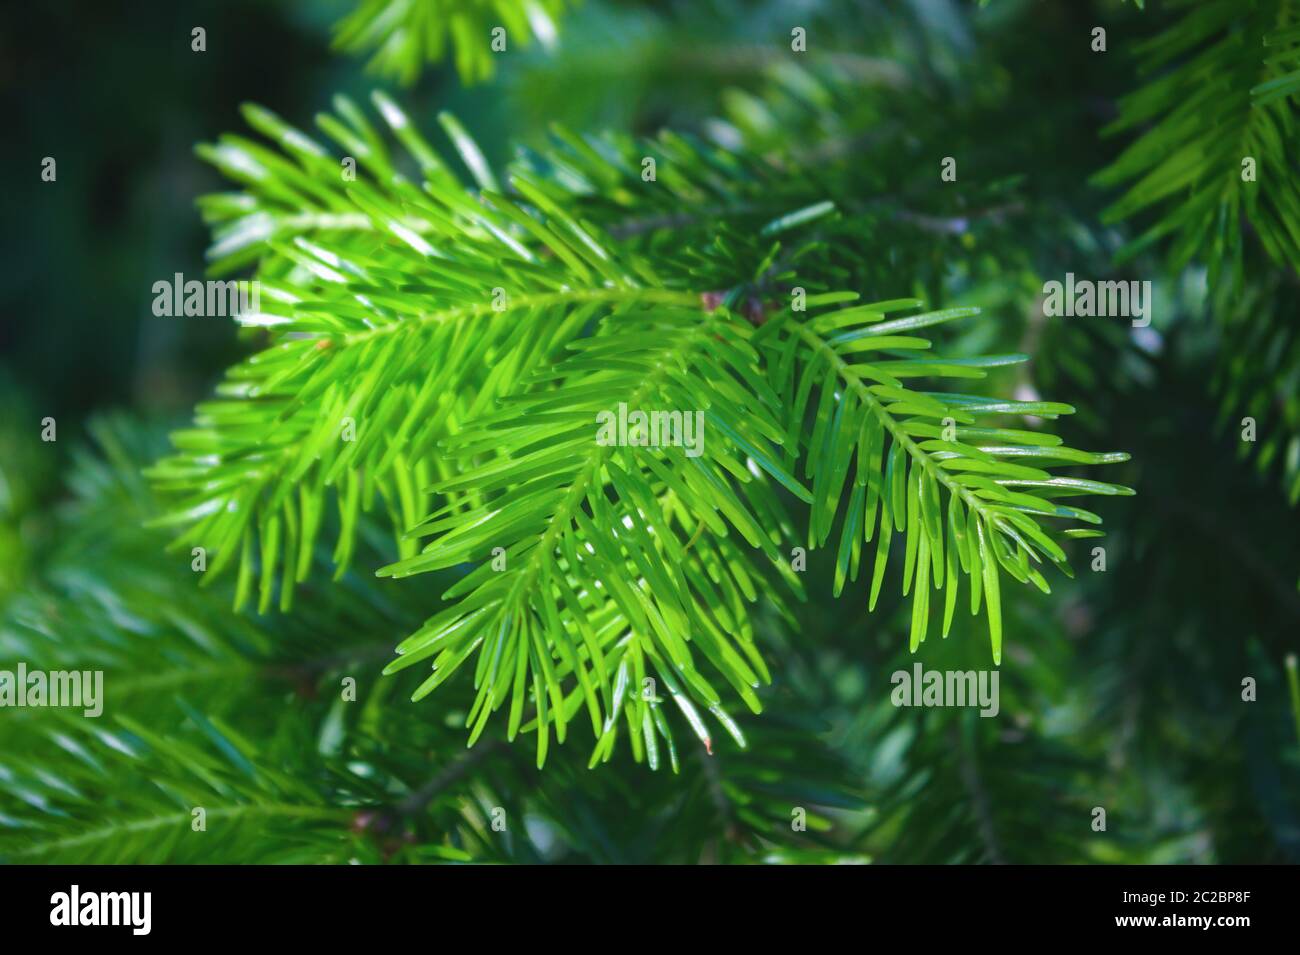 Bright green young spruce branches close-up, selective focuse. Beautiful lush branches of spruce with needles. Stock Photo